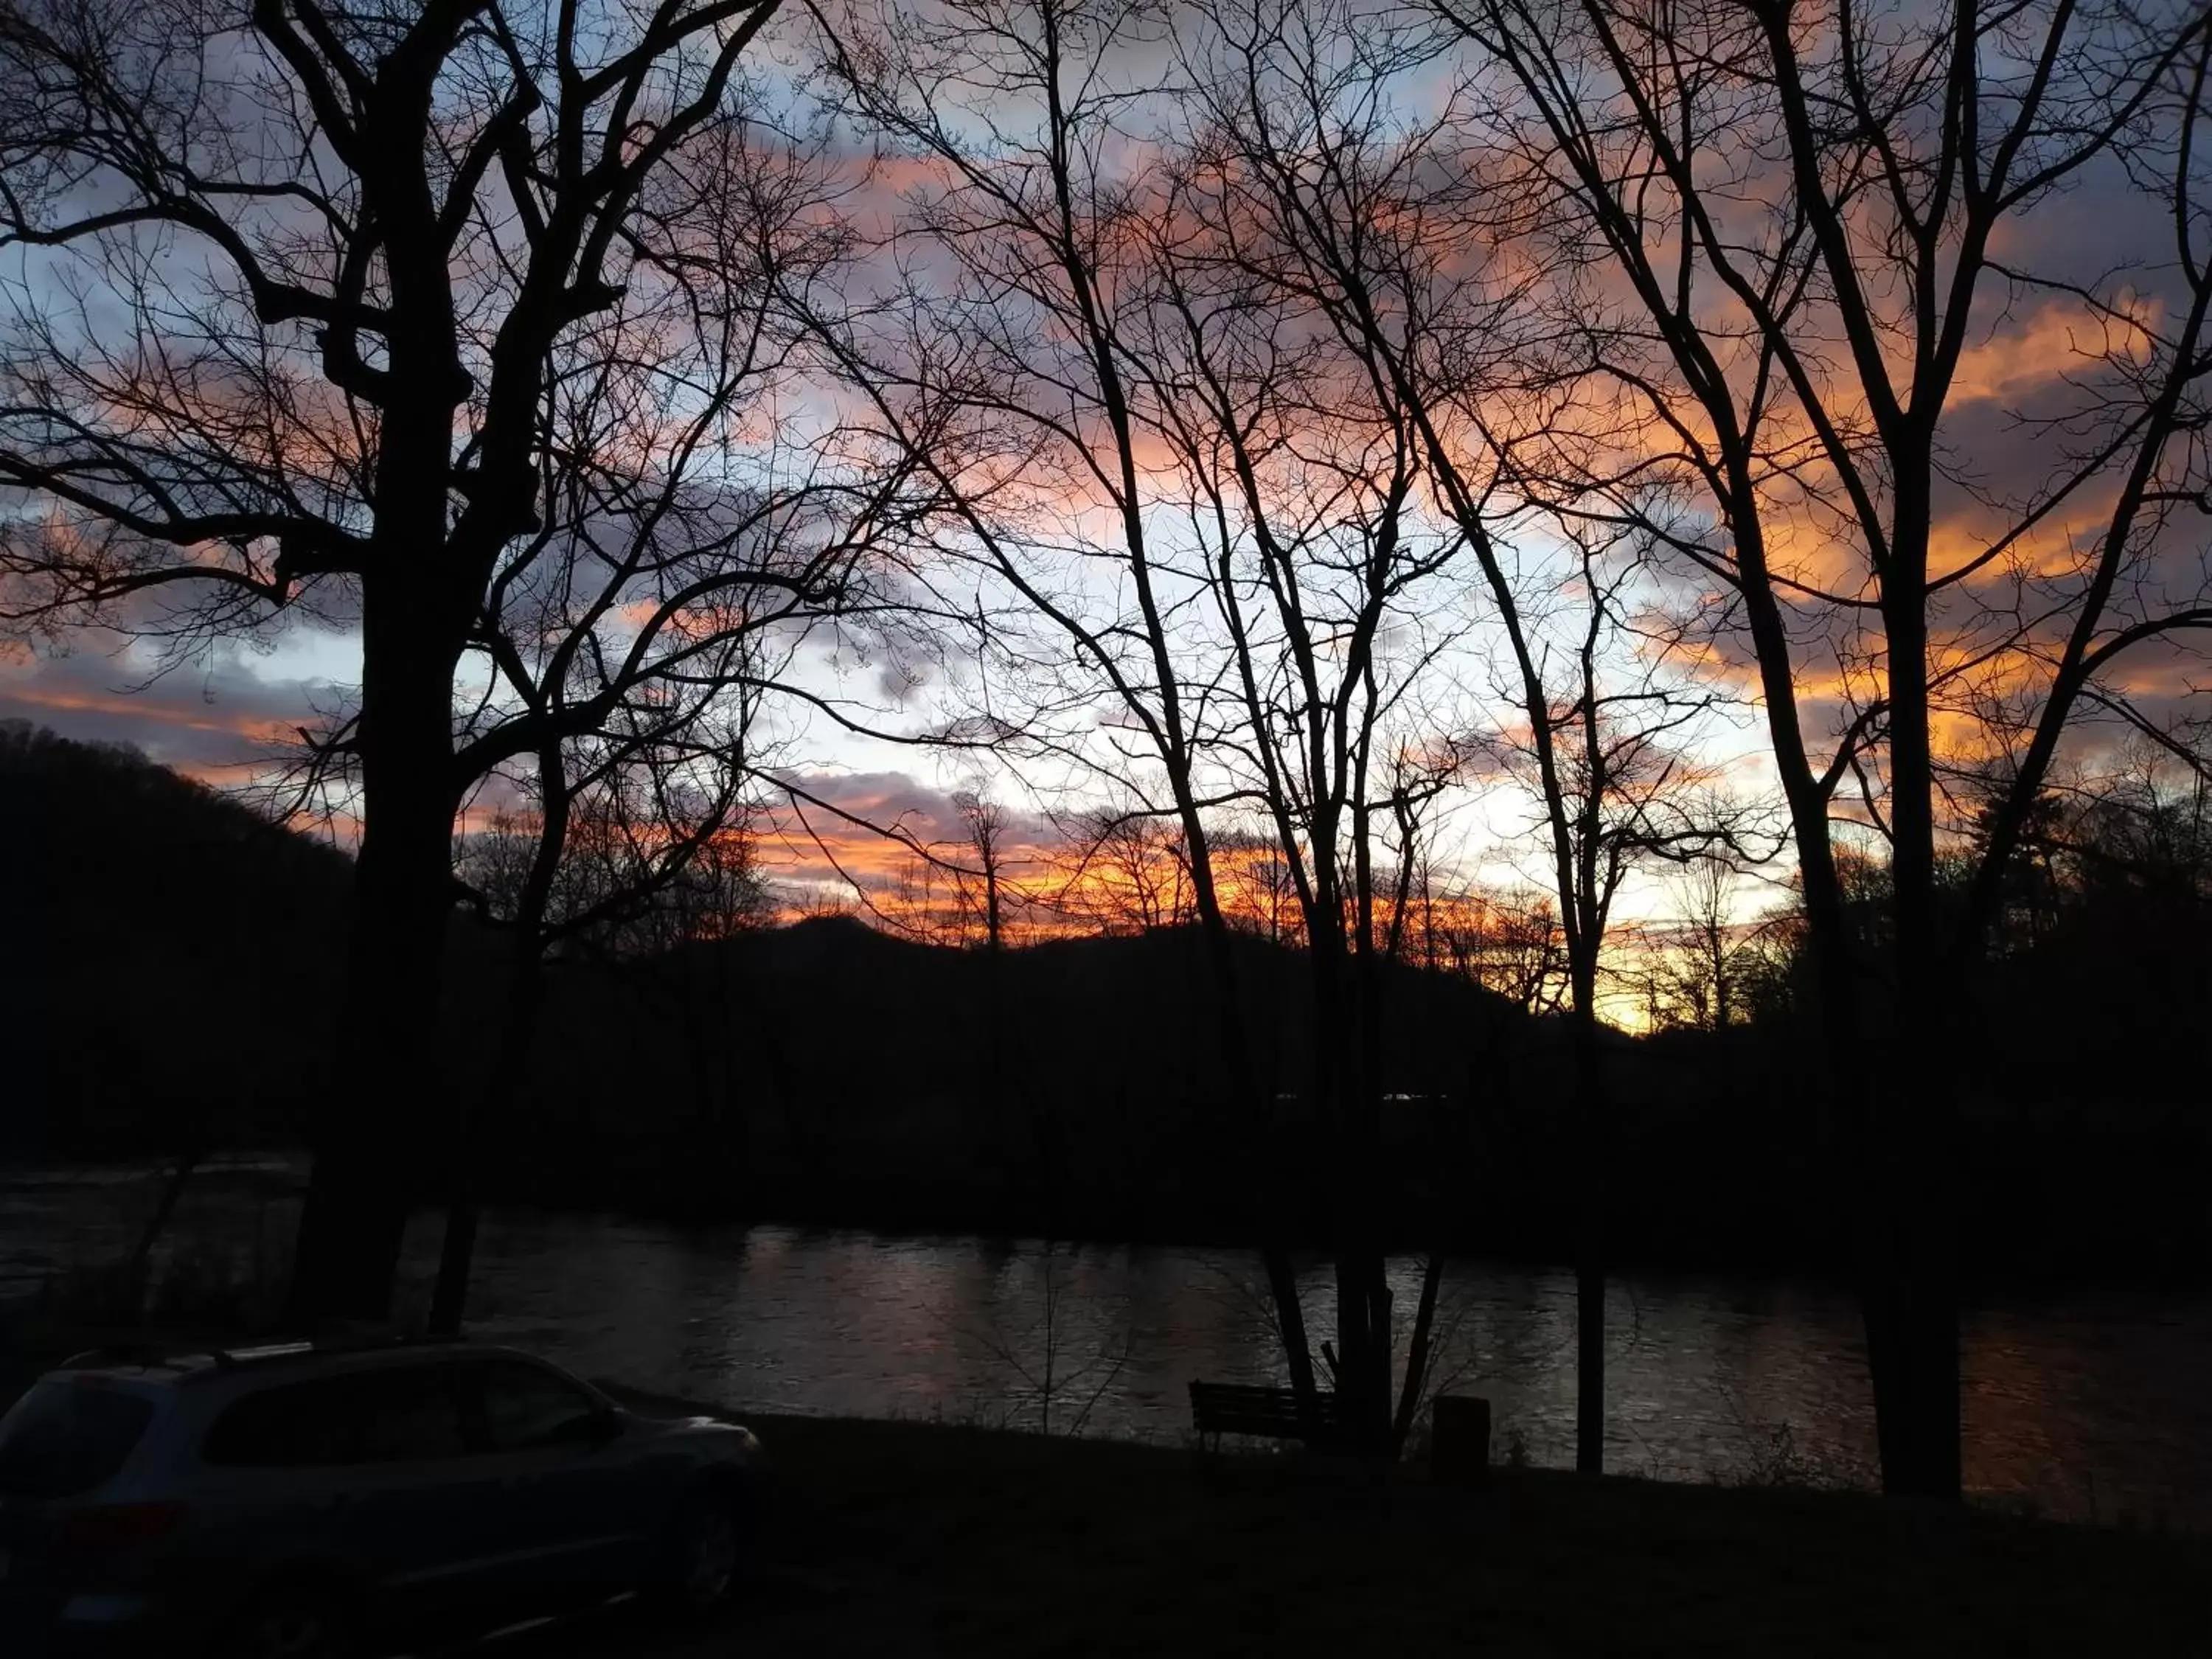 Sunset, Winter in Riverbend Lodging